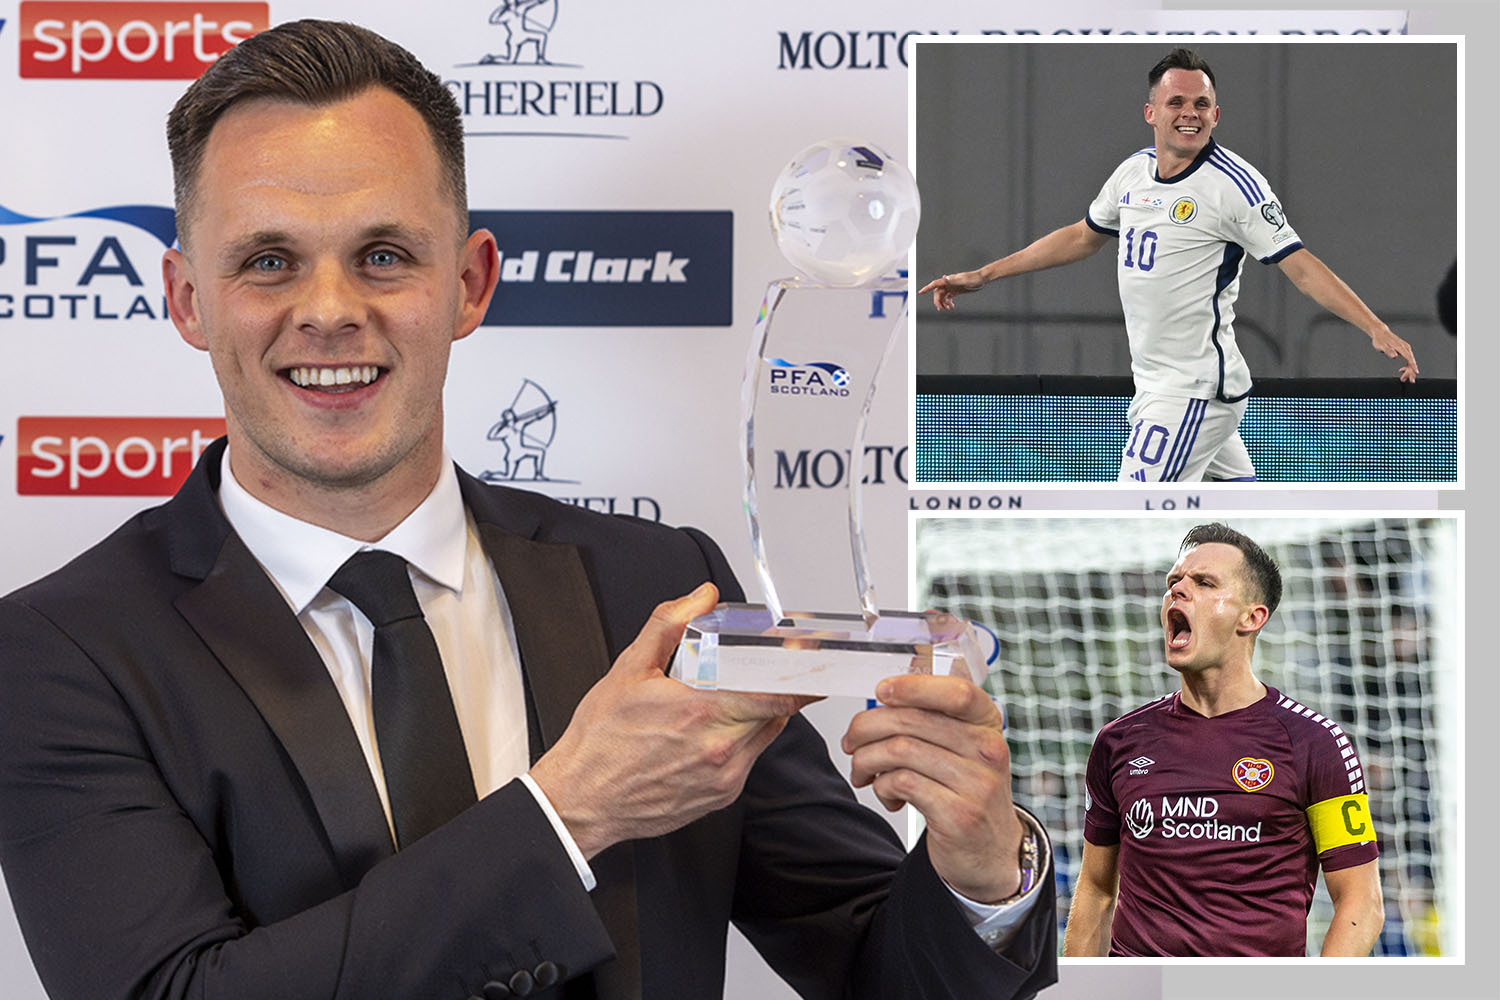 Lawrence Shankland wins PFA Scotland Player of the Year ahead of Old Firm rivals